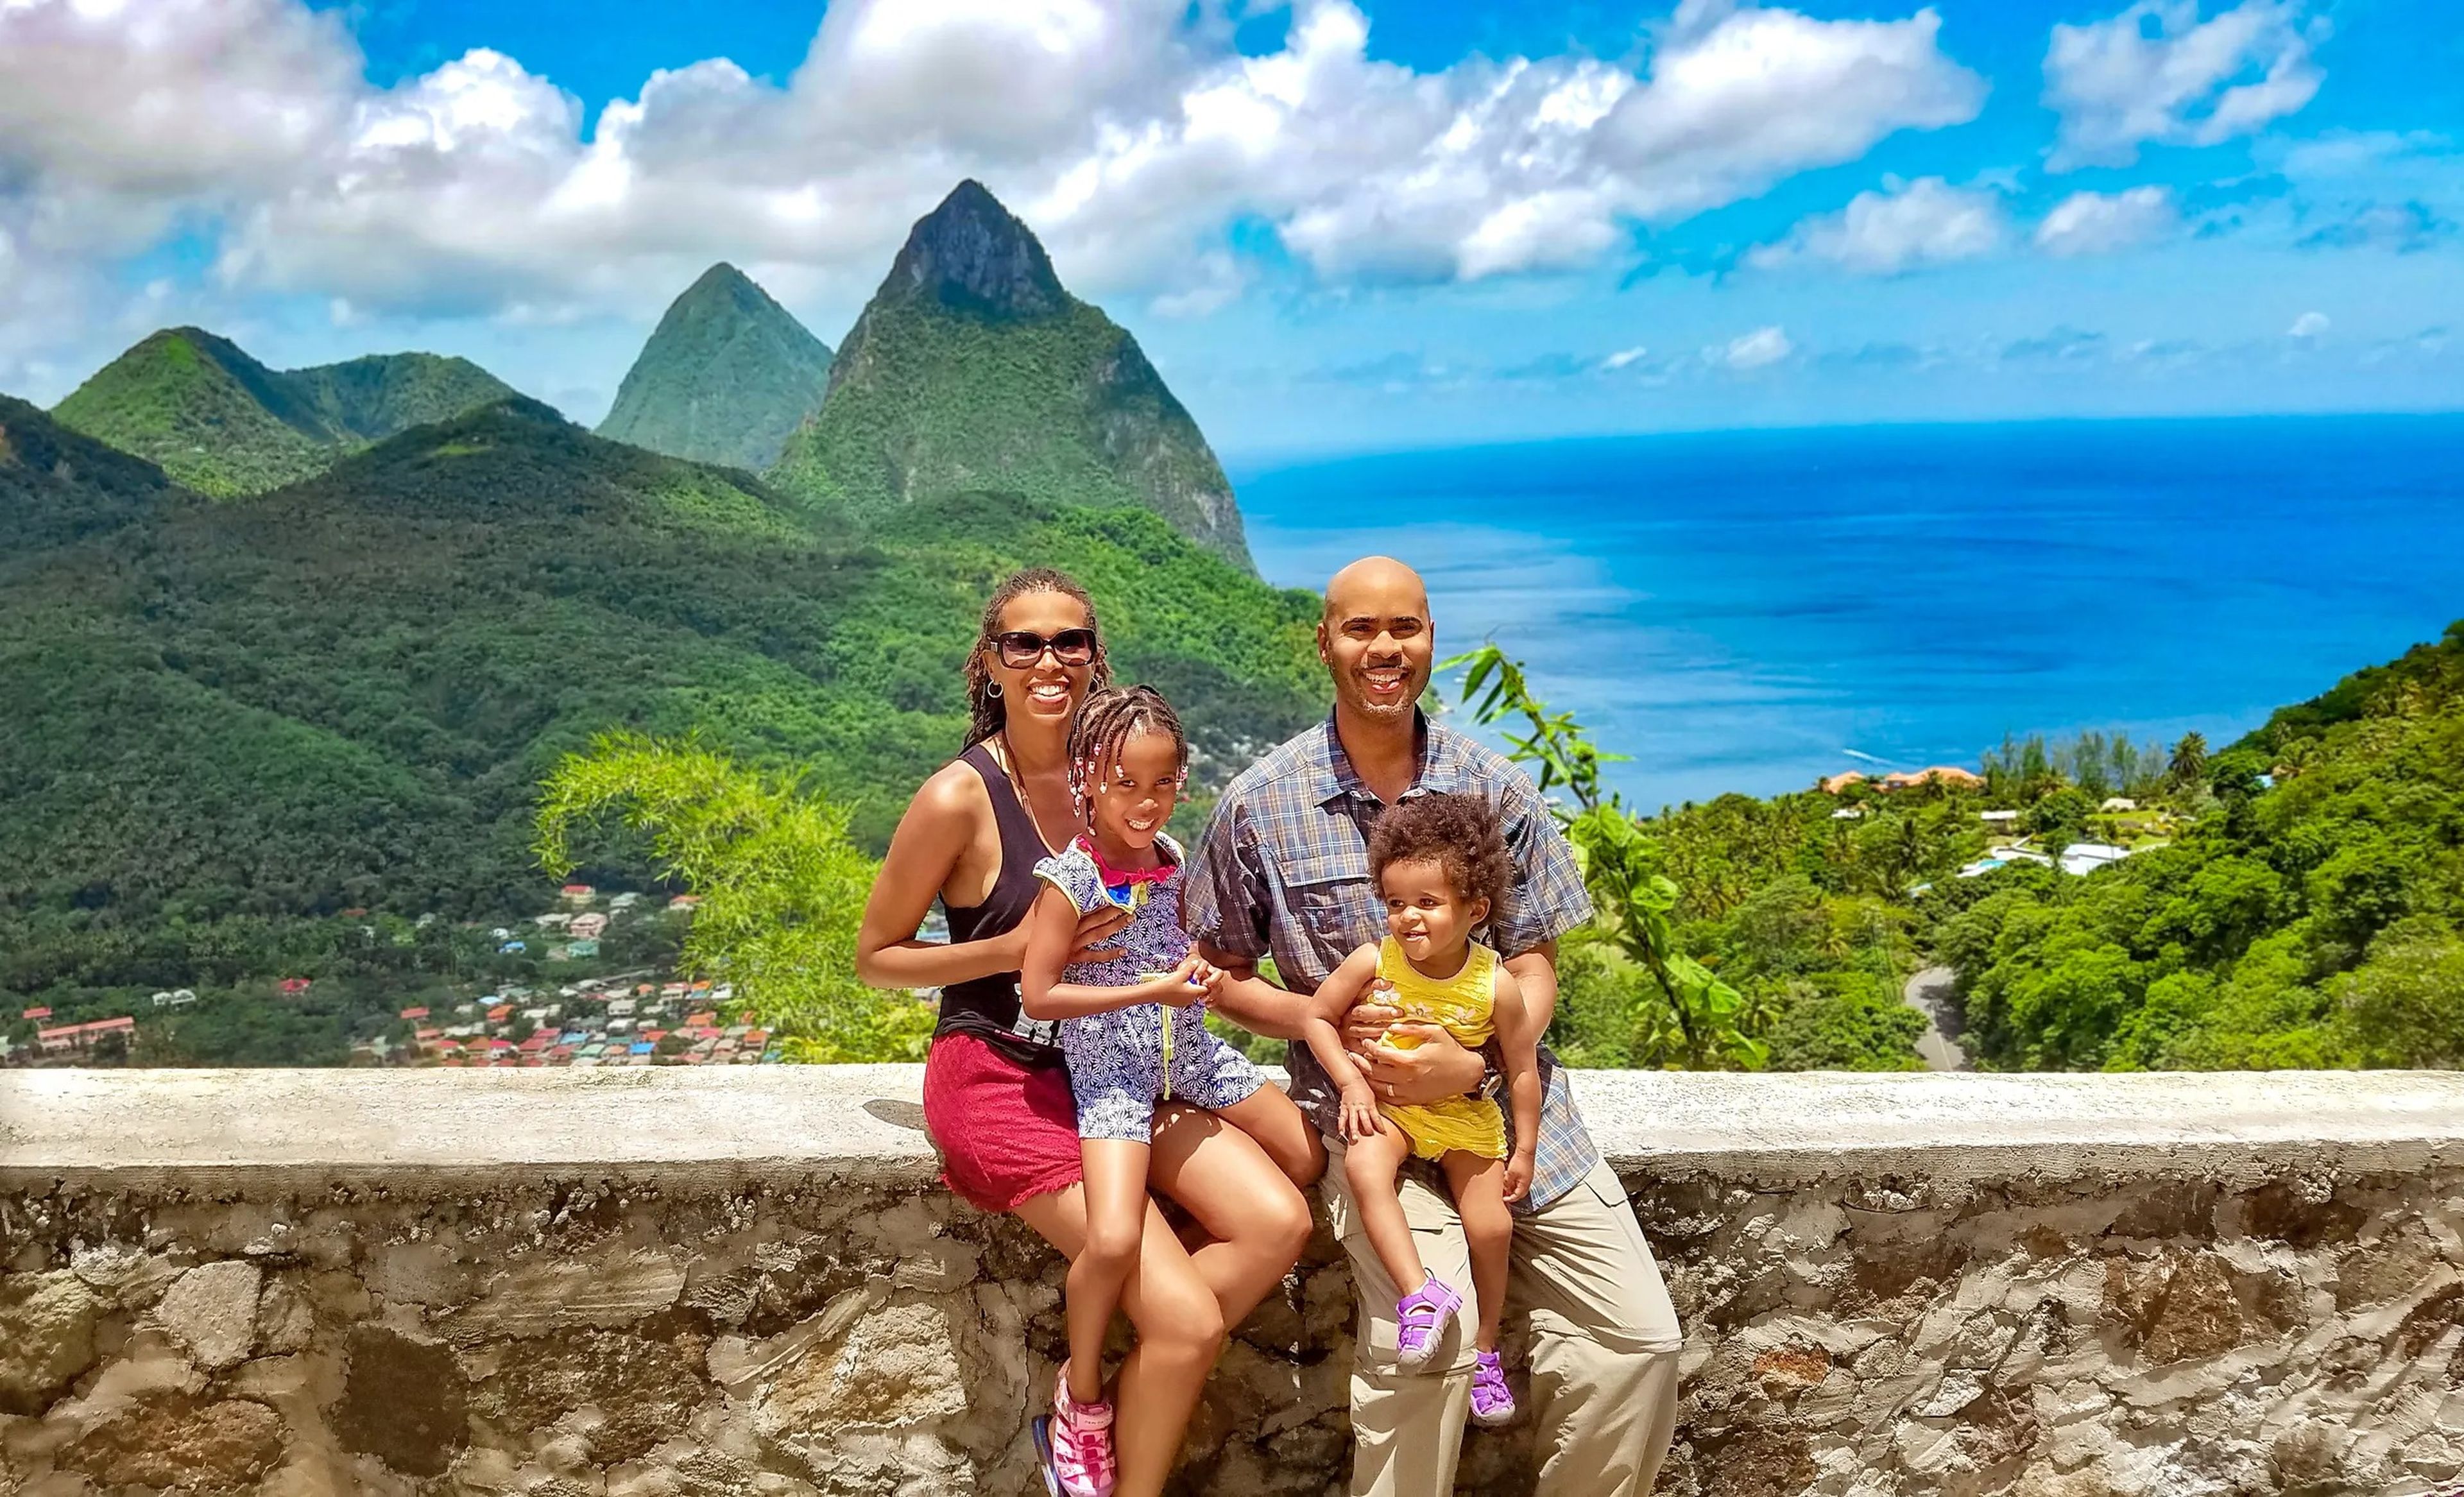 Taryn White and her family in St. Lucia.